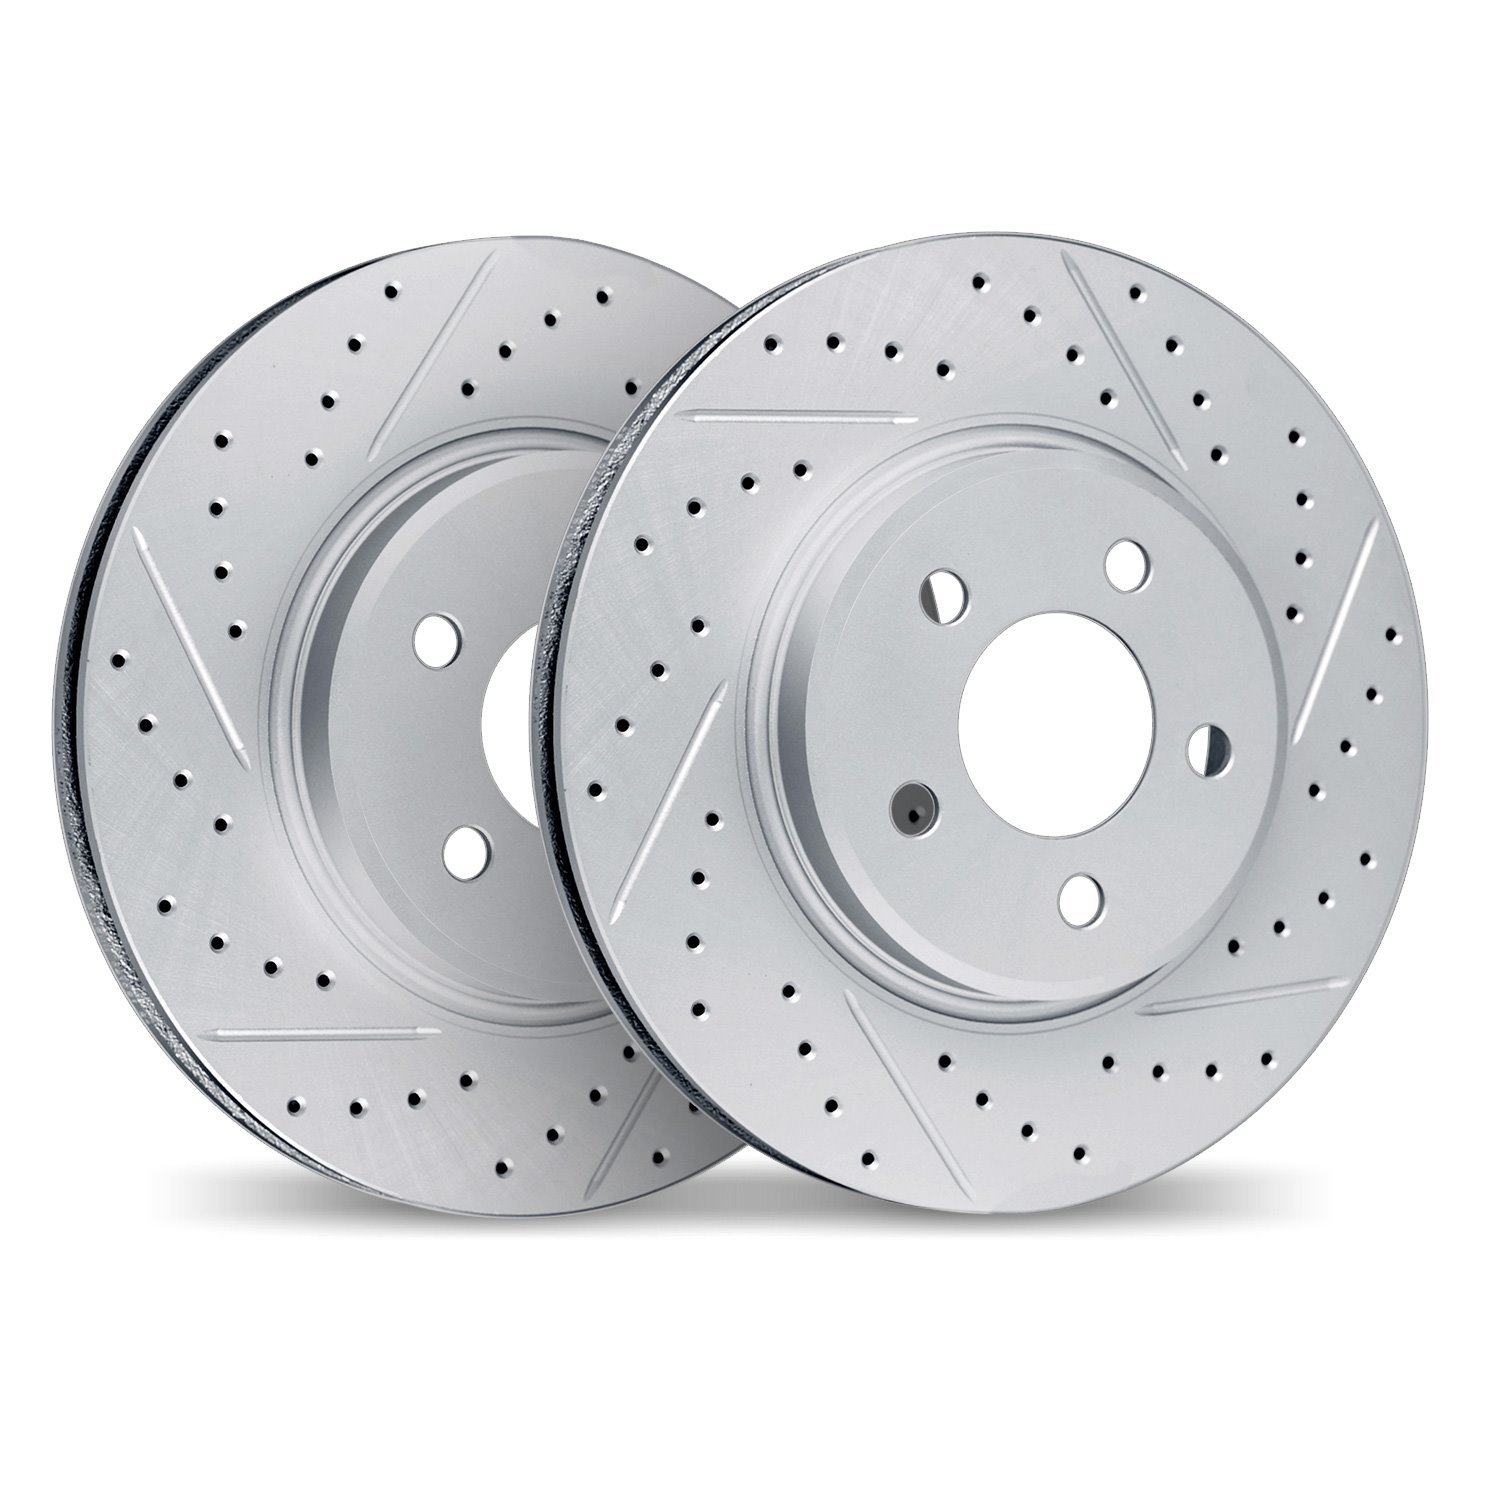 2002-47005 Geoperformance Drilled/Slotted Brake Rotors, 2001-2007 GM, Position: Front